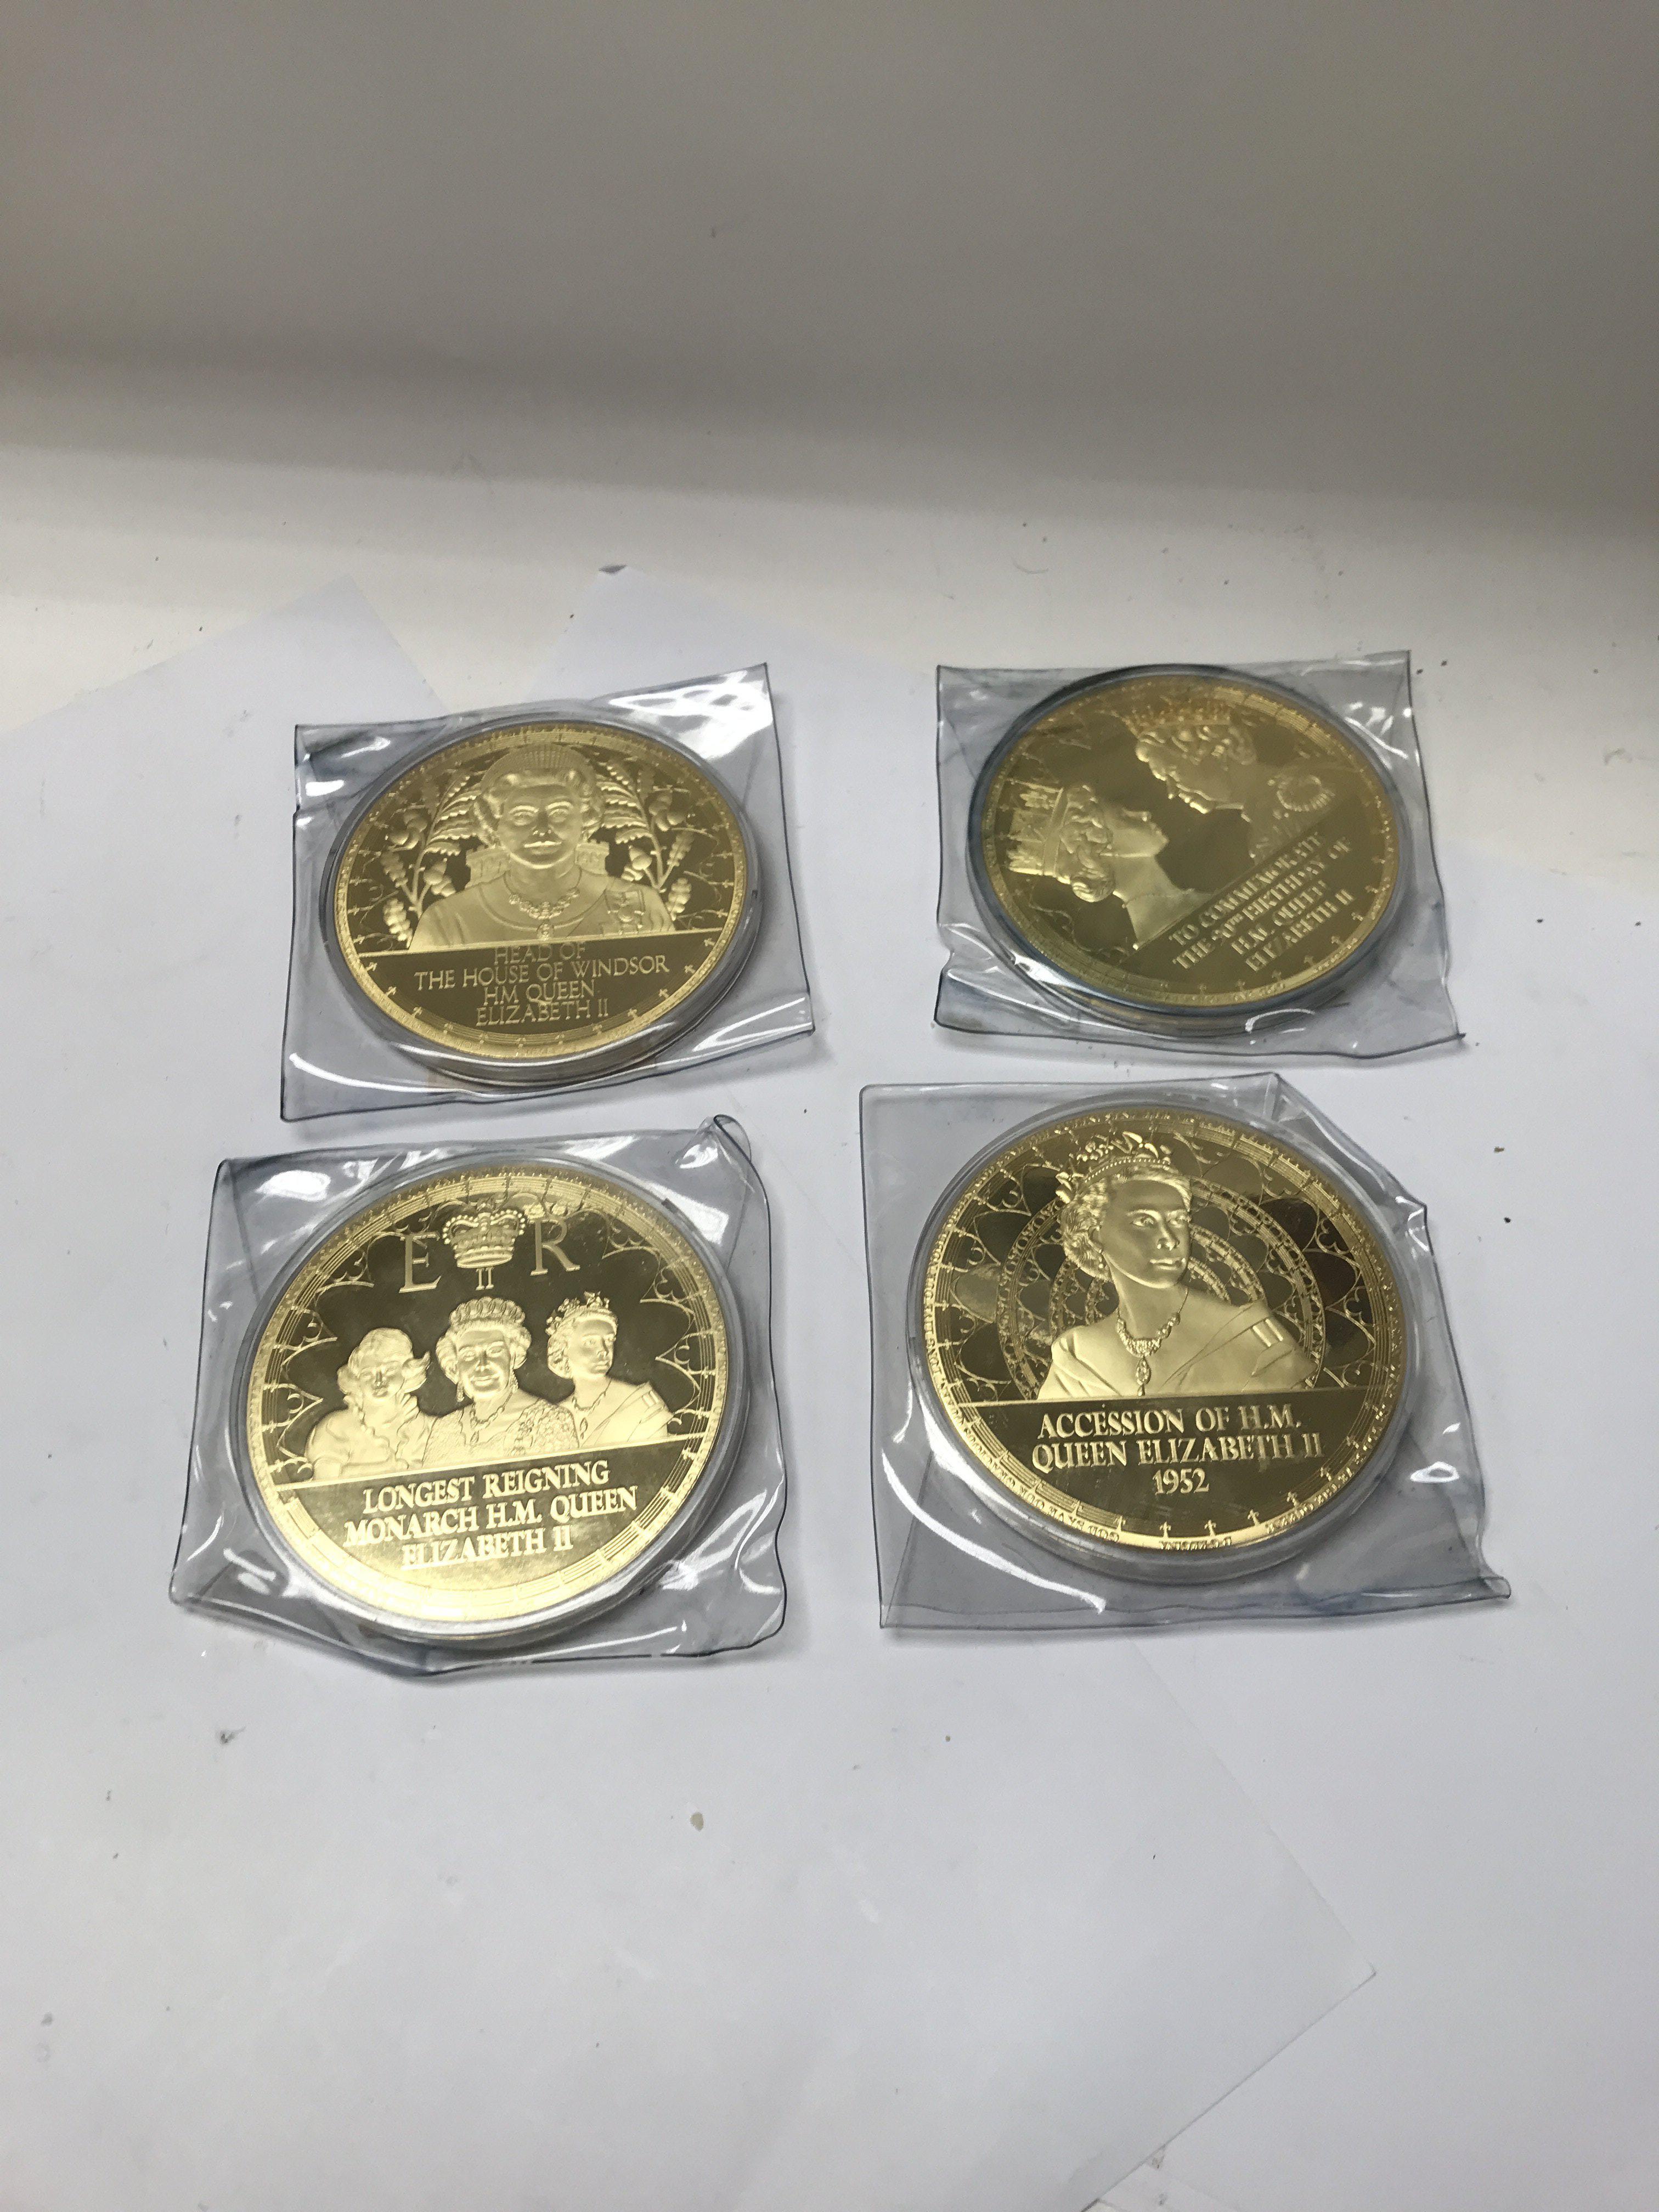 A collection of large gold plated commemorative me